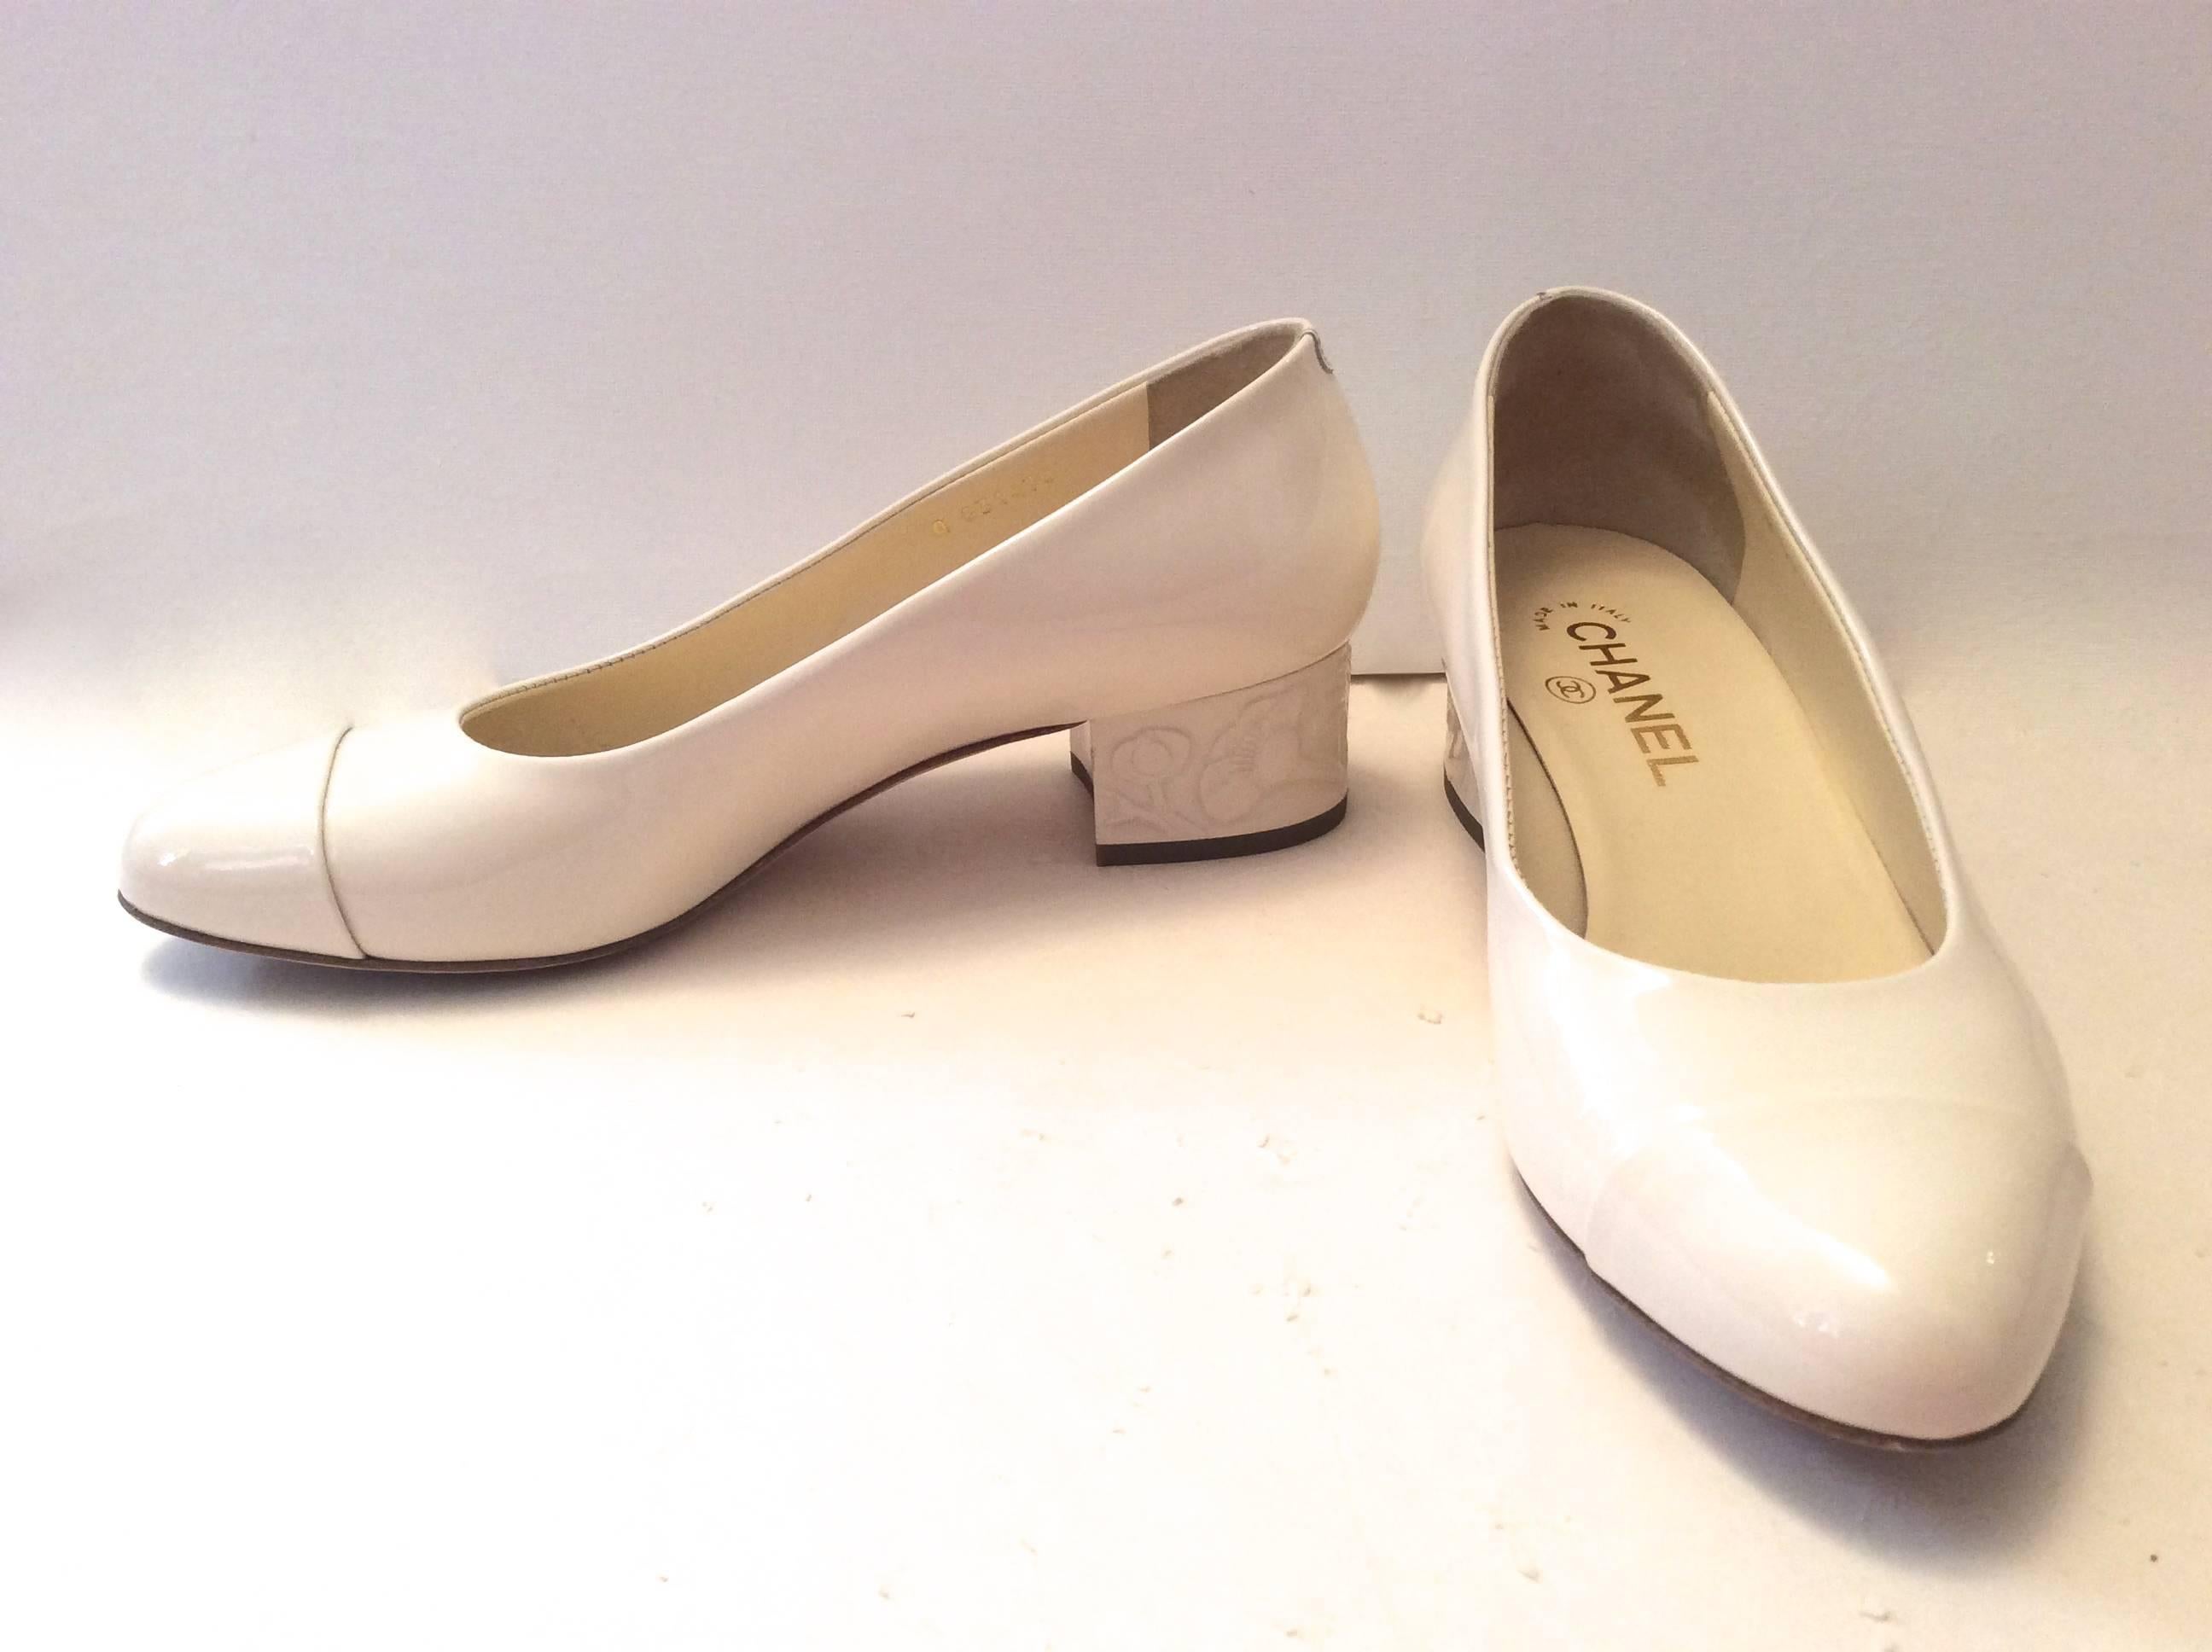 Chanel Pumps - Cream White Patent Leather - Embossed Flowers - Size 37.5 For Sale 3